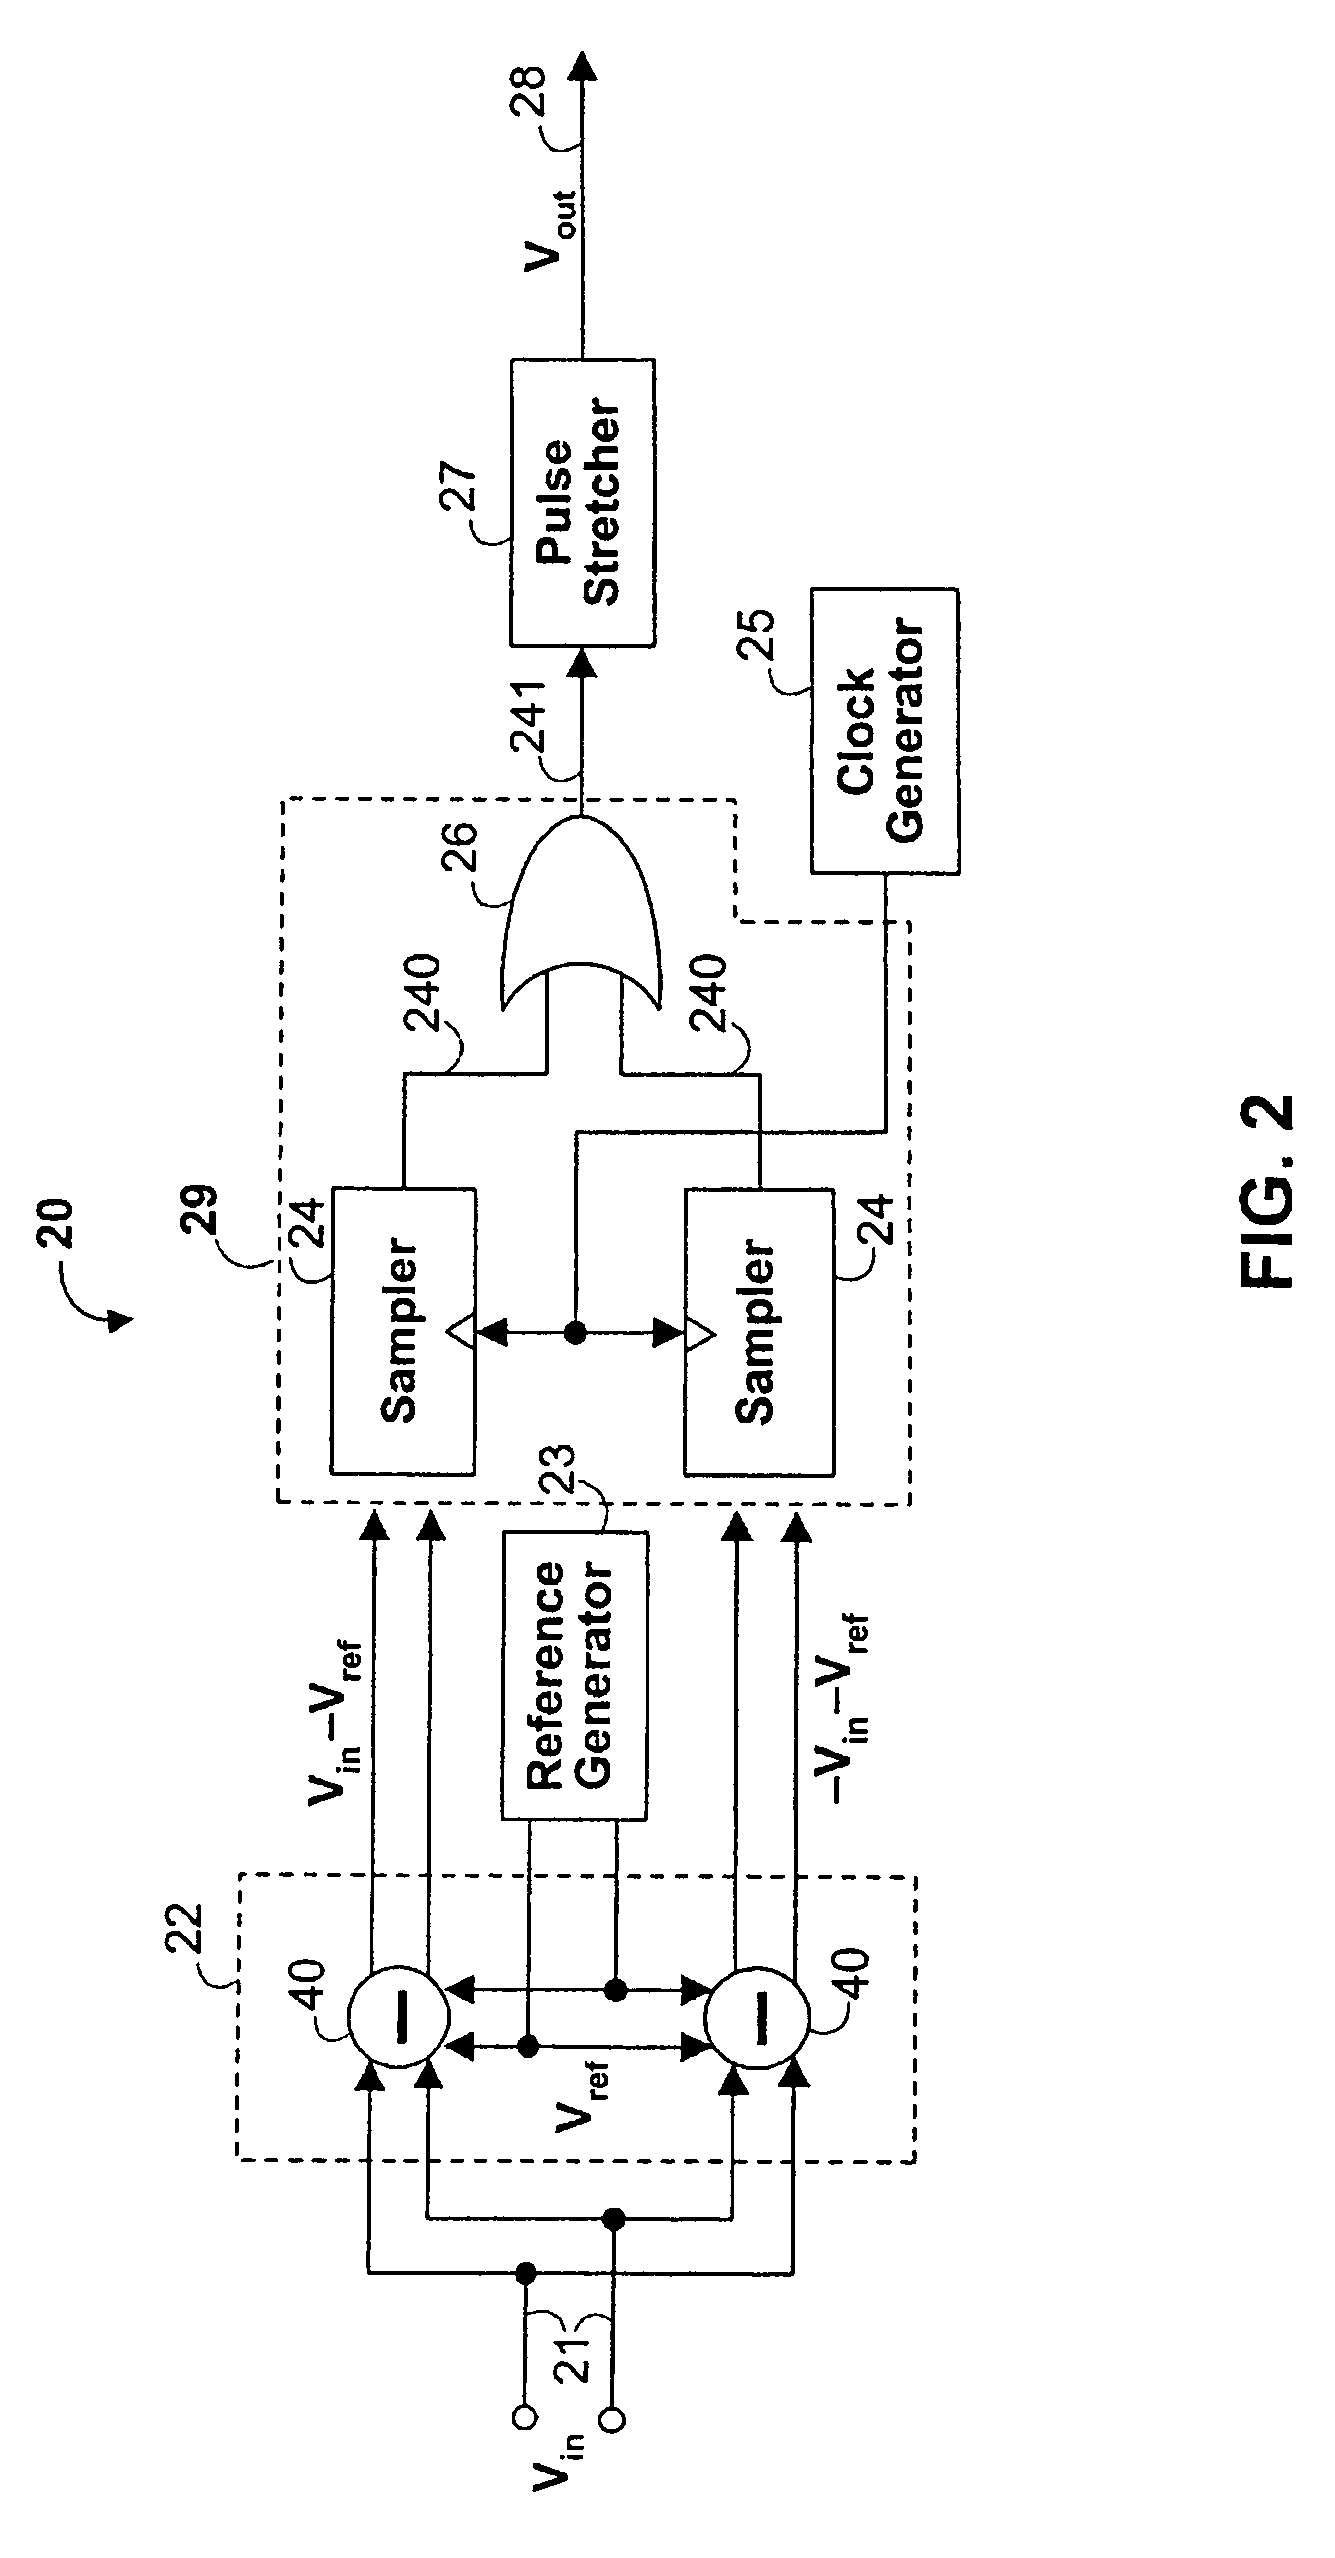 High-precision signal detection for high-speed receiver